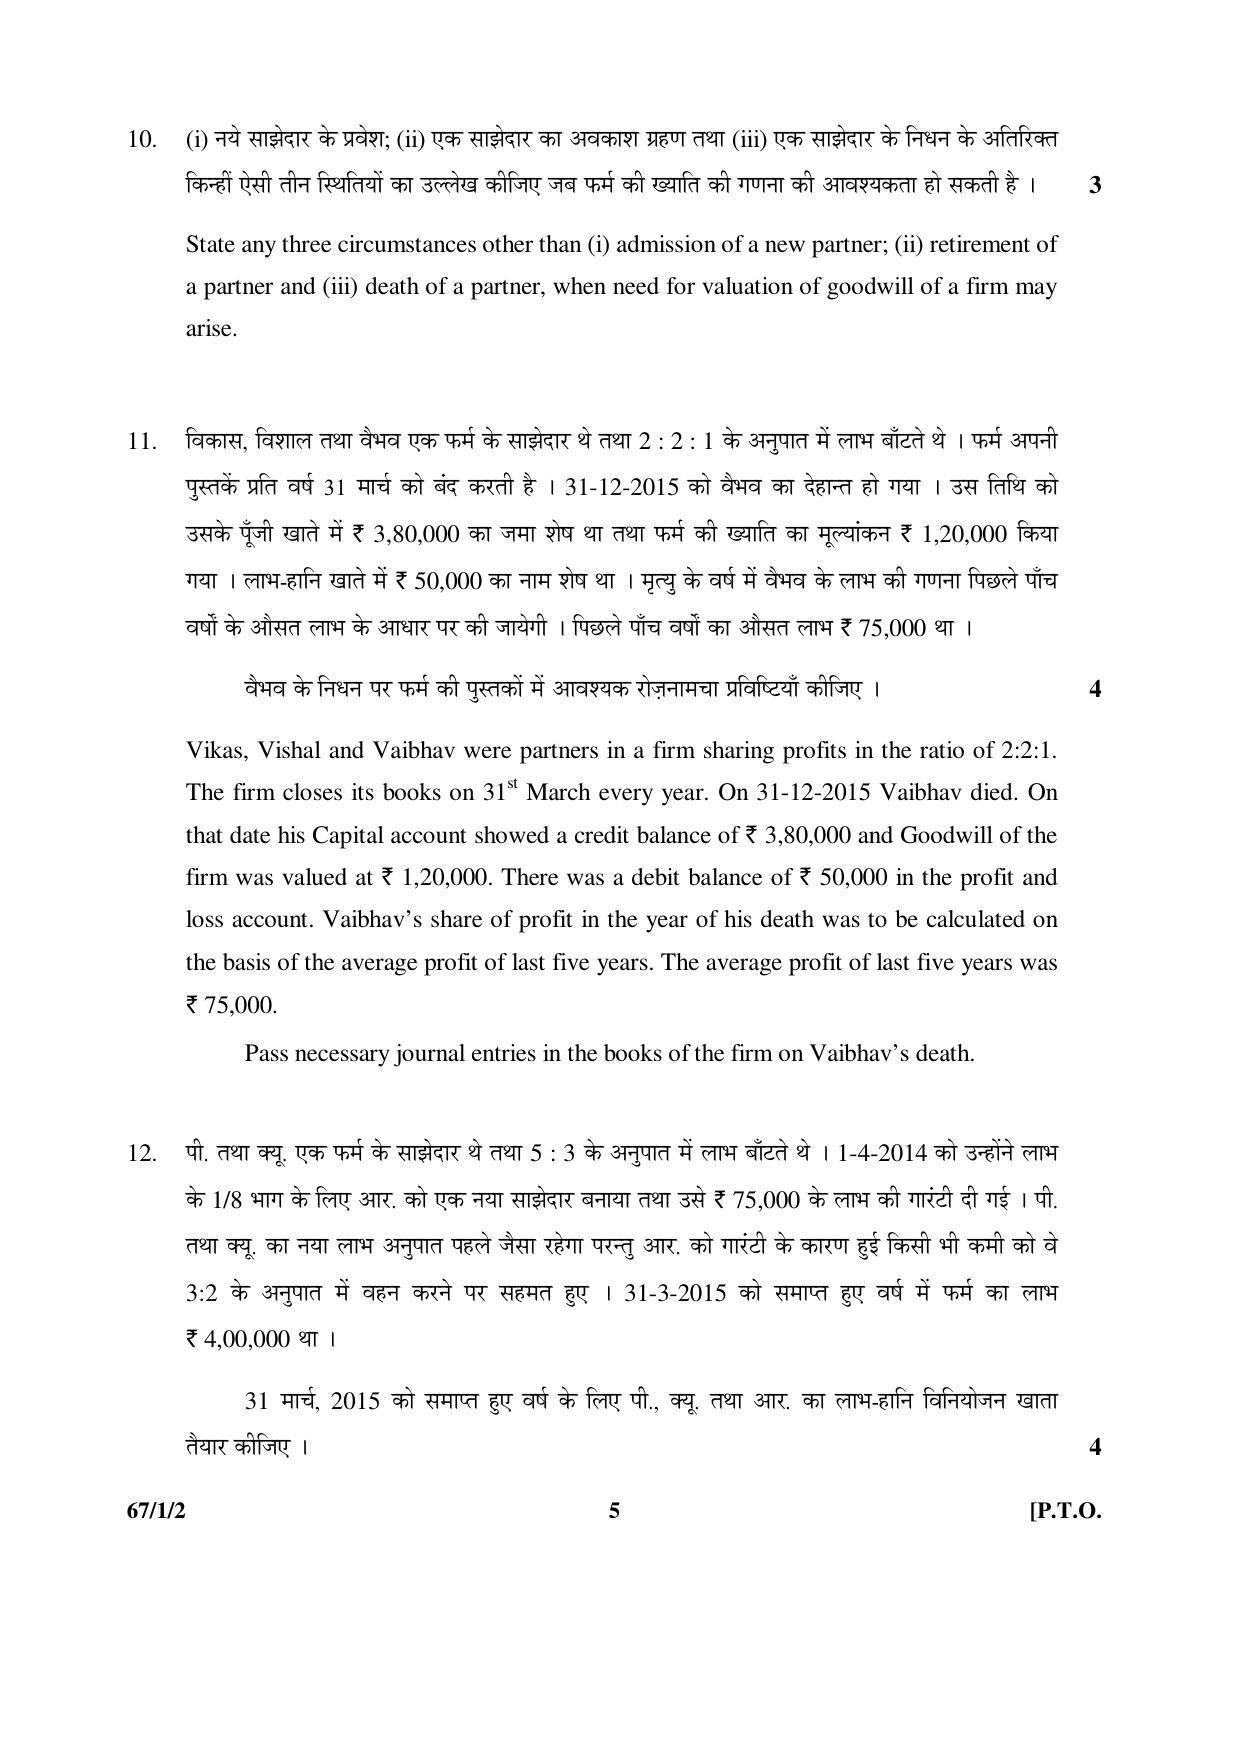 CBSE Class 12 67-1-2 ACCOUNTANCY 2016 Question Paper - Page 5